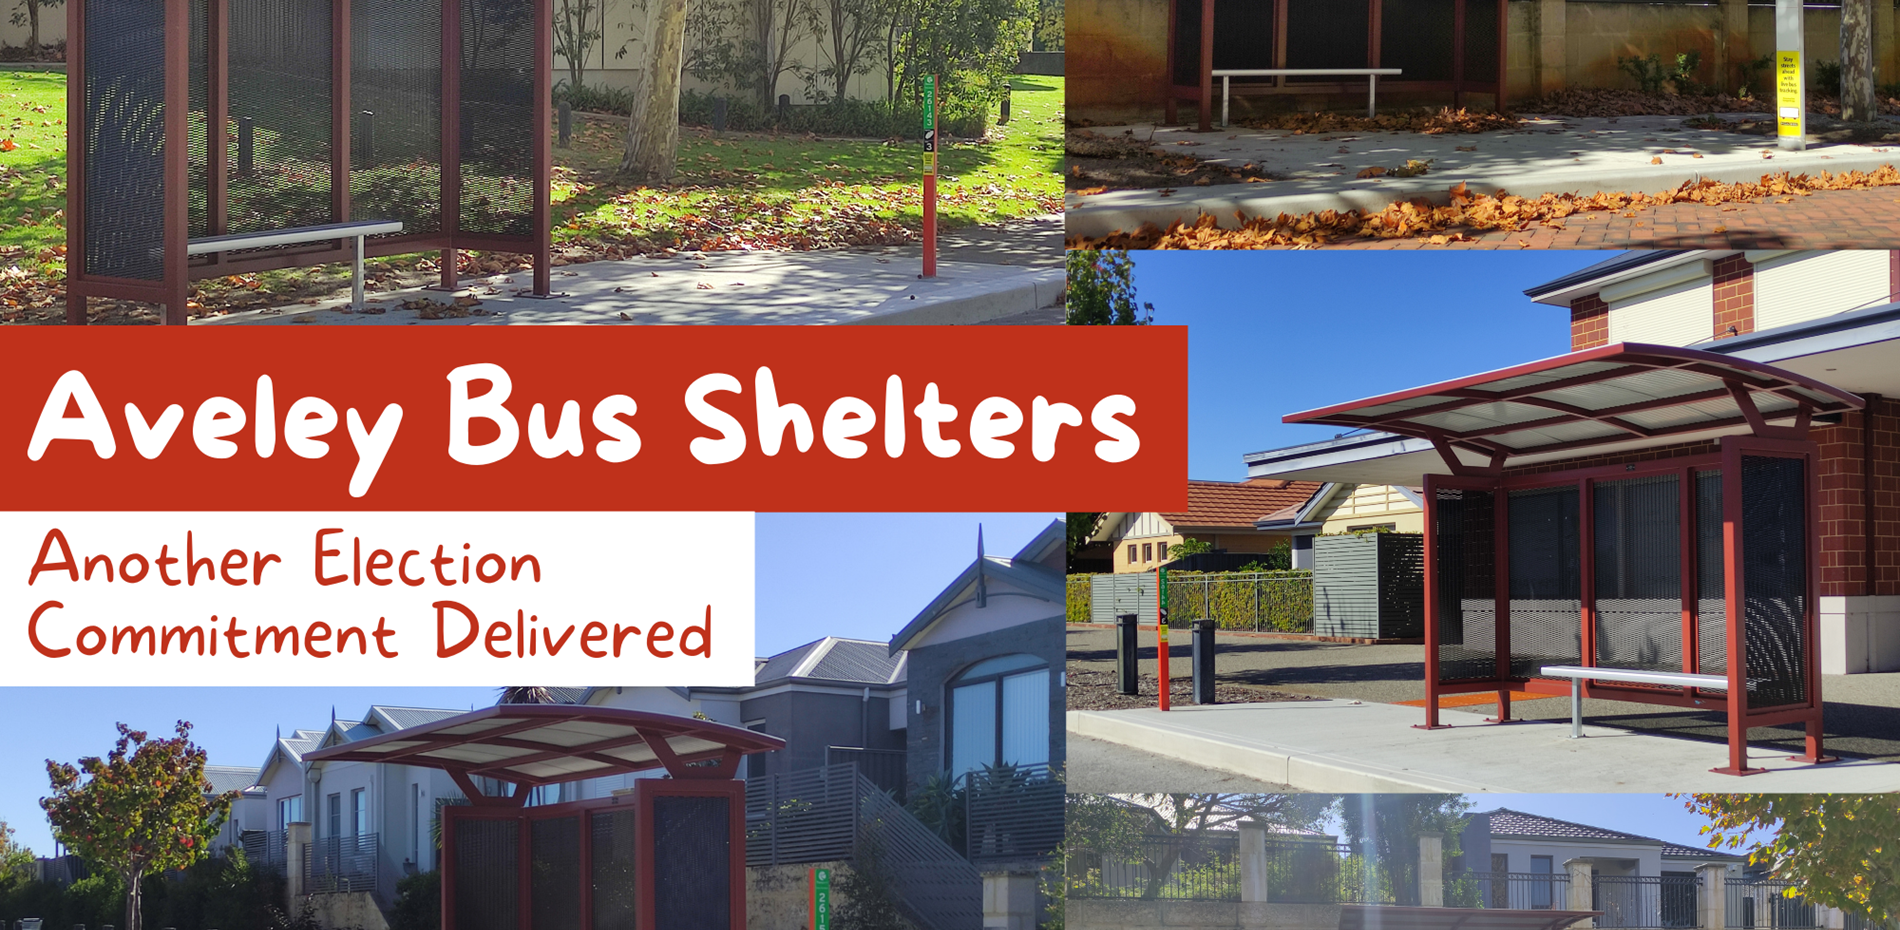 BUS SHELTERS TO PROVIDE COMFORT TO AVELEY BUS USERS Main Image